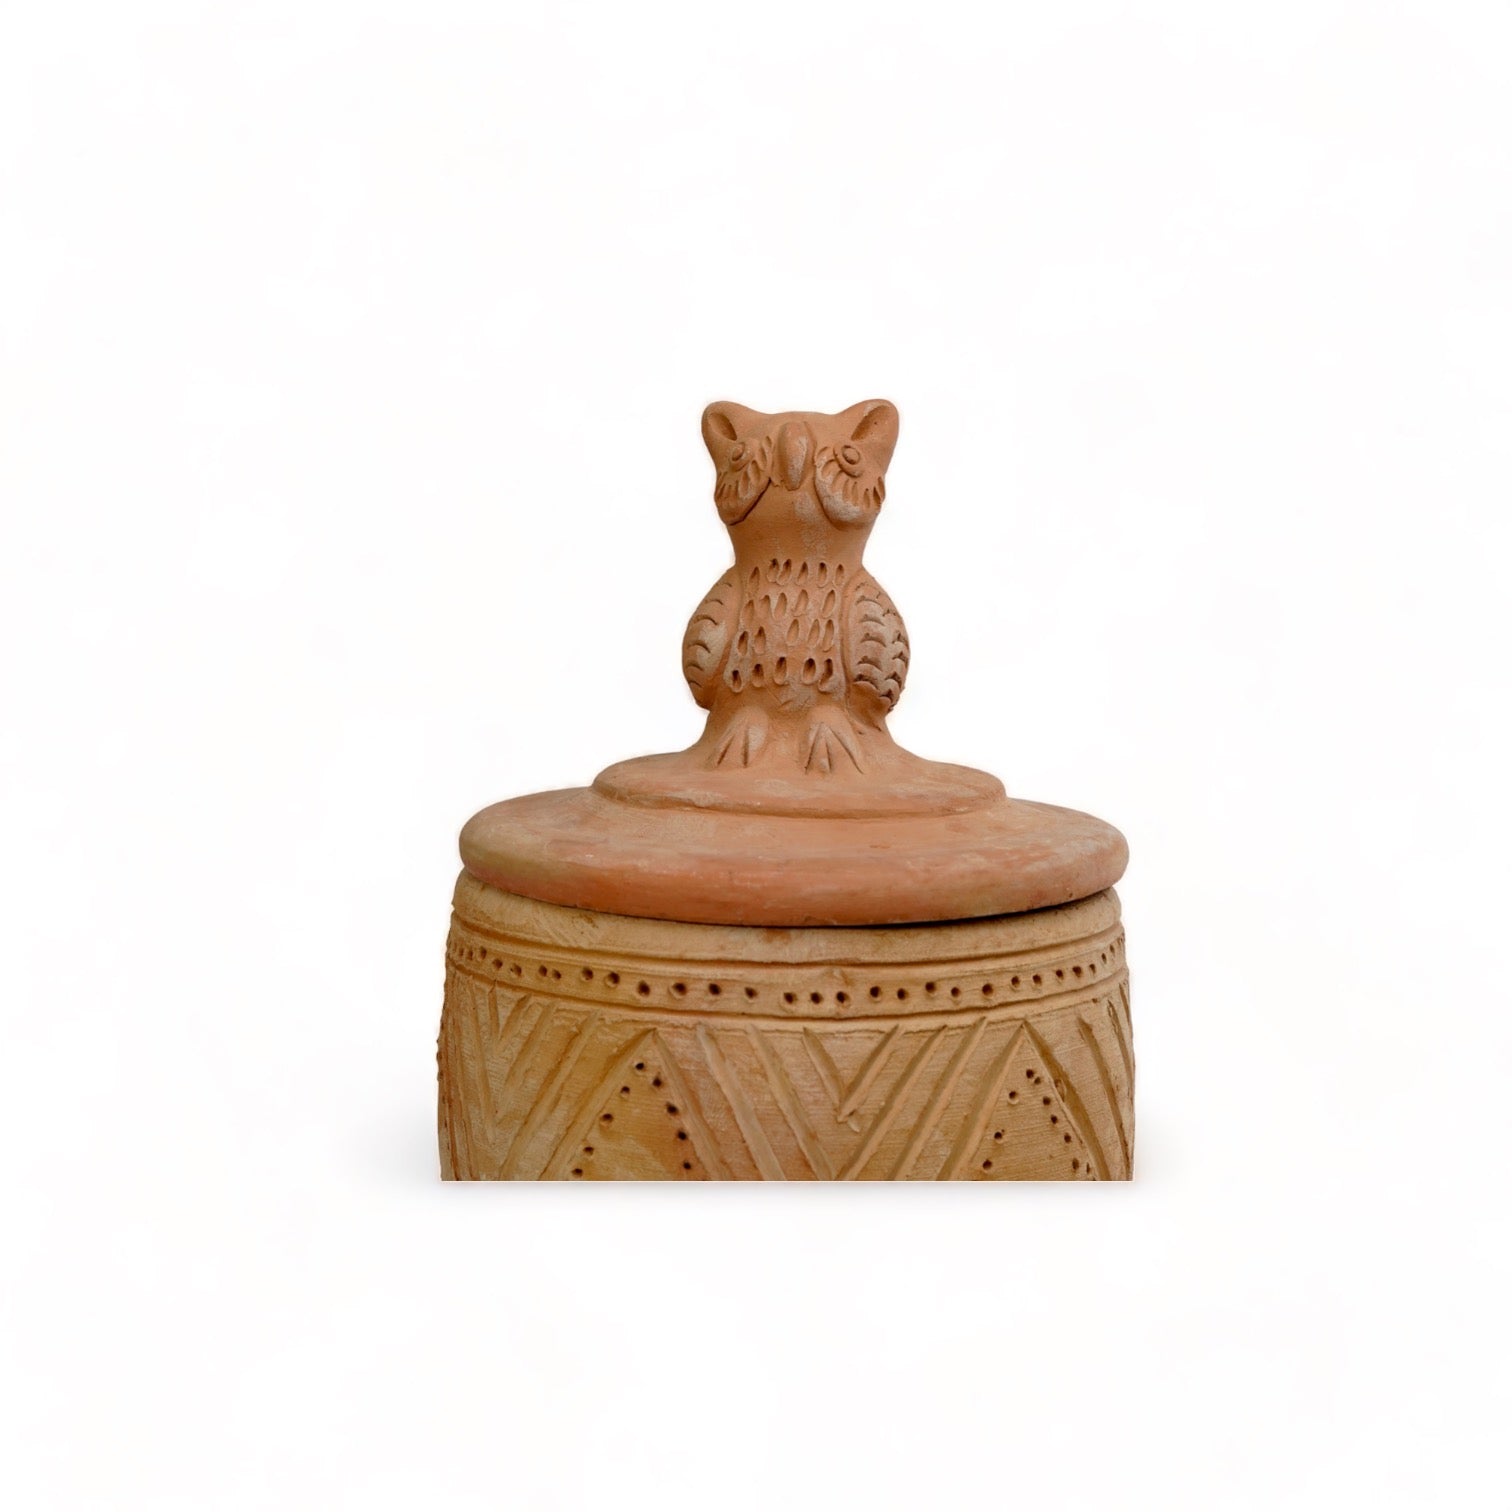 Incised Terracotta unglazed Canister - Owl theme